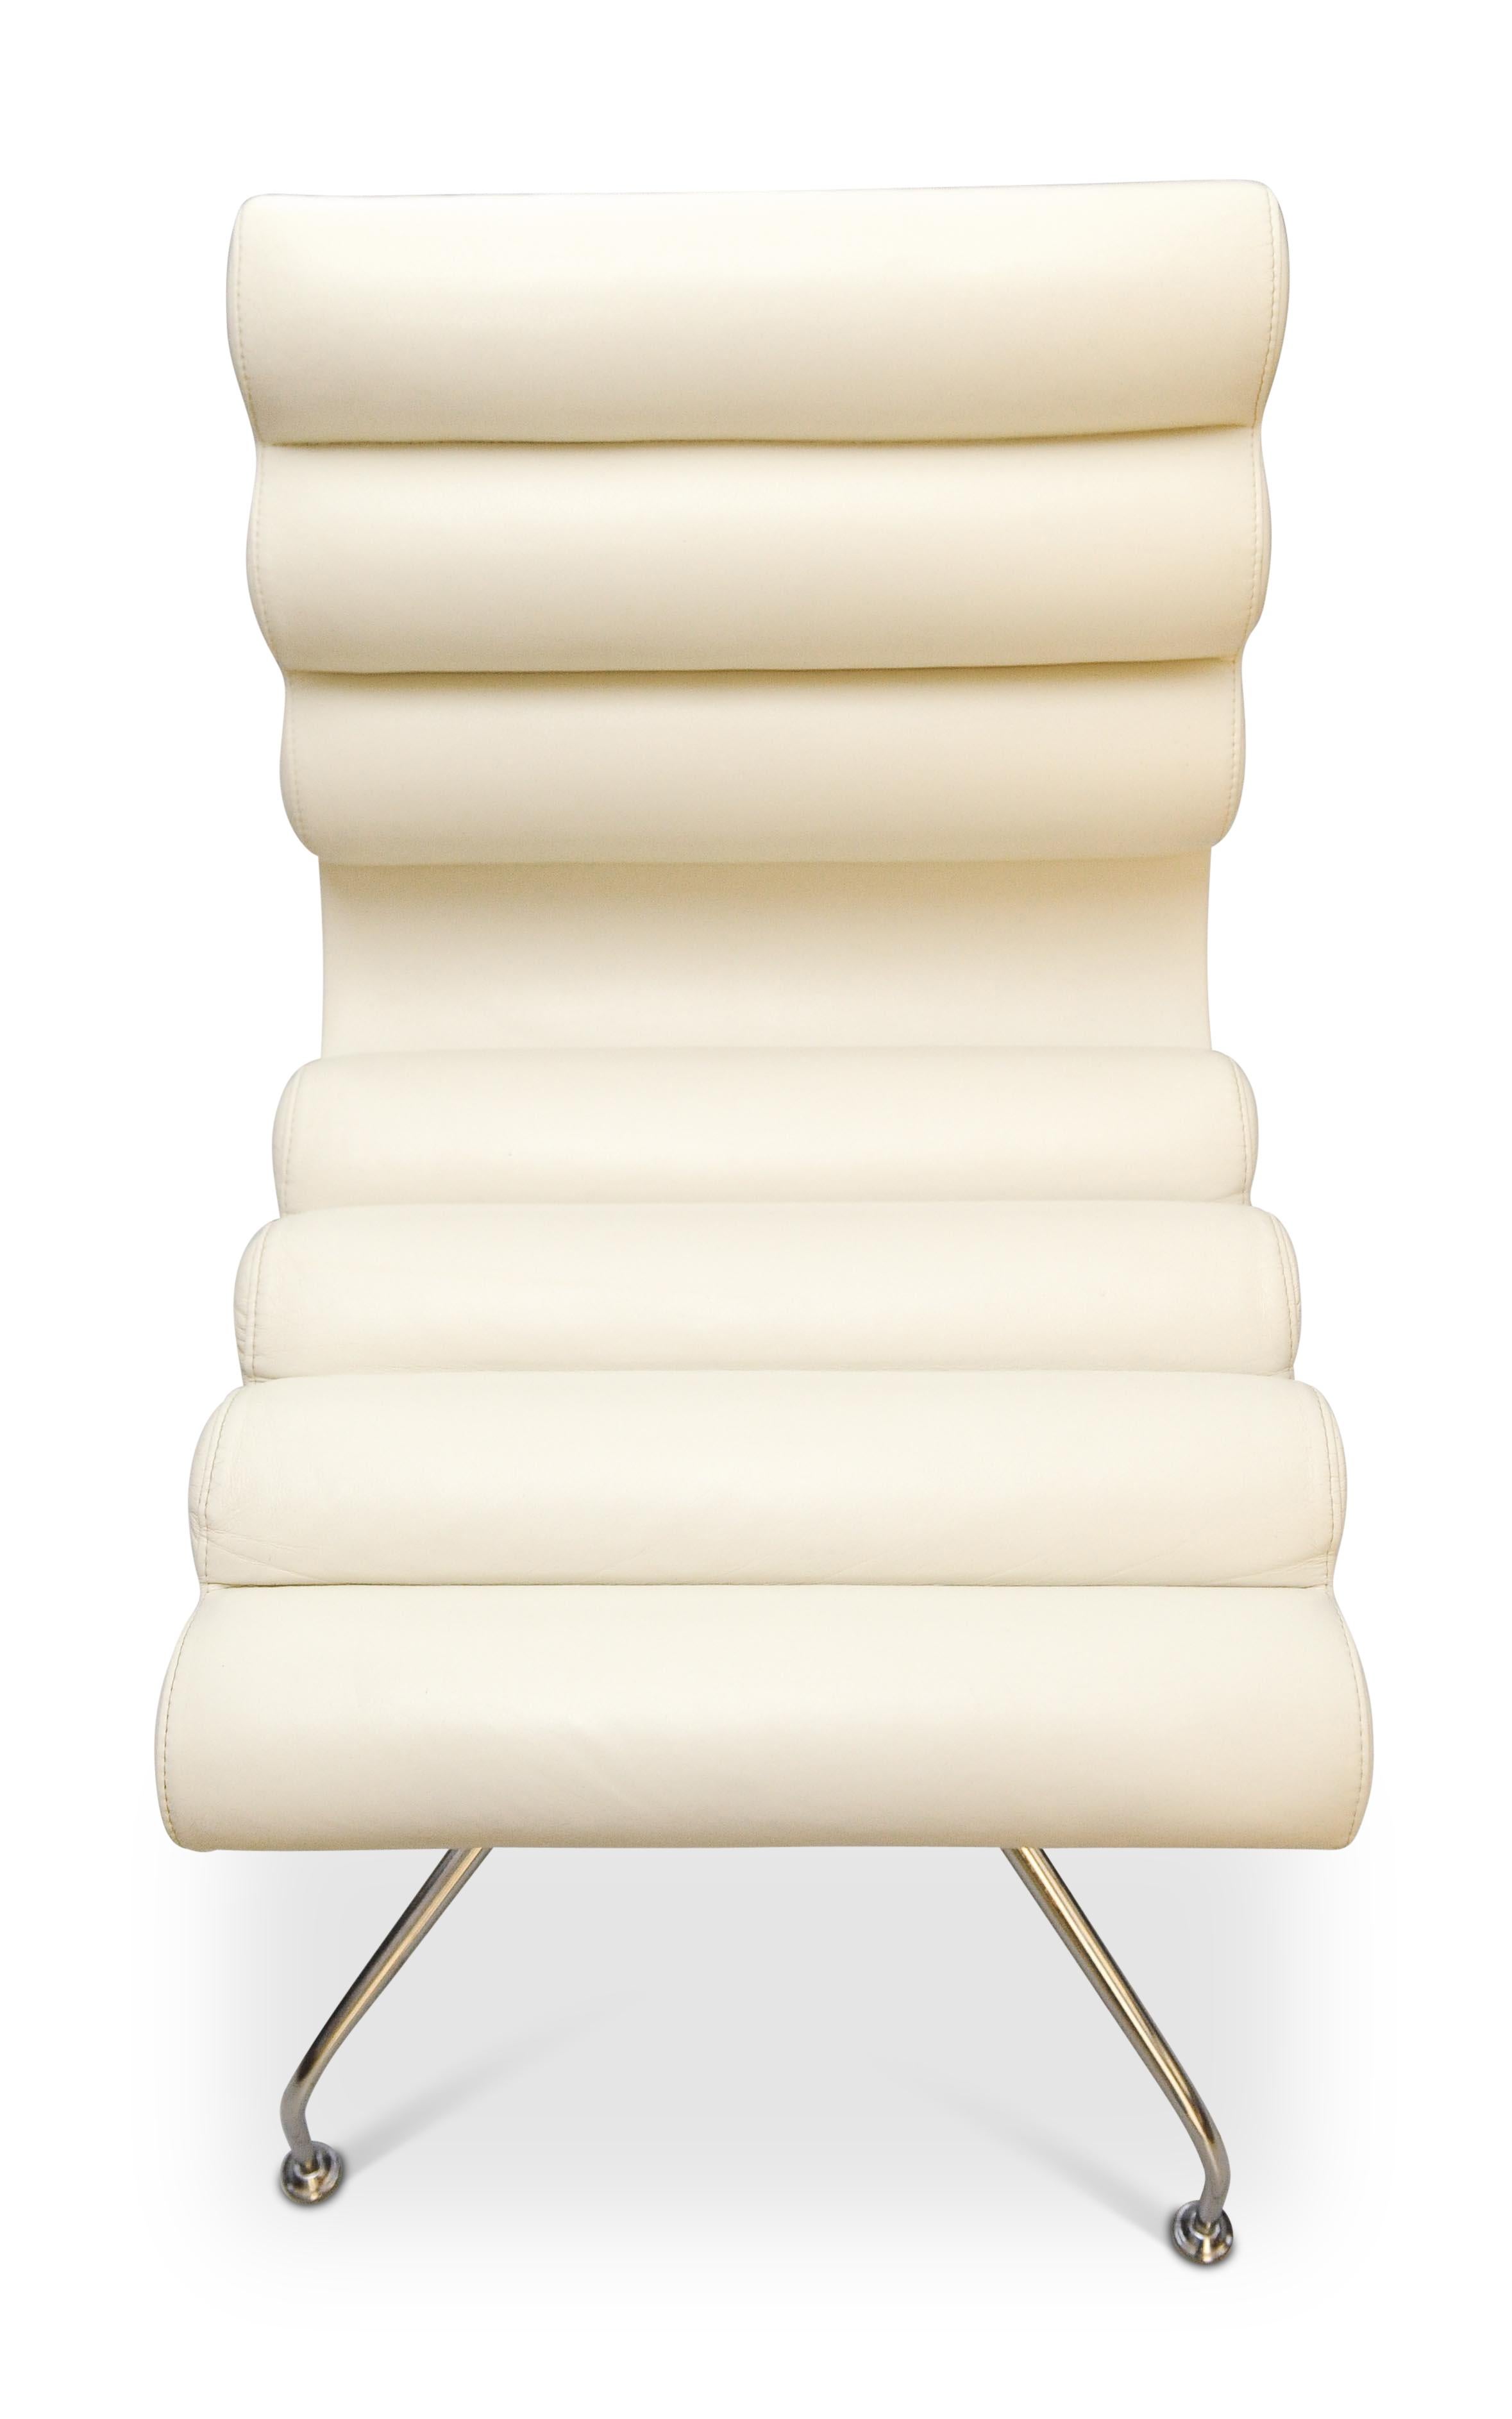 Giovanna Modonutti 'Giofra' for Frag, a Set of 4 White Leather 'Canouan' Chairs In Good Condition For Sale In High Wycombe, Buckinghamshire